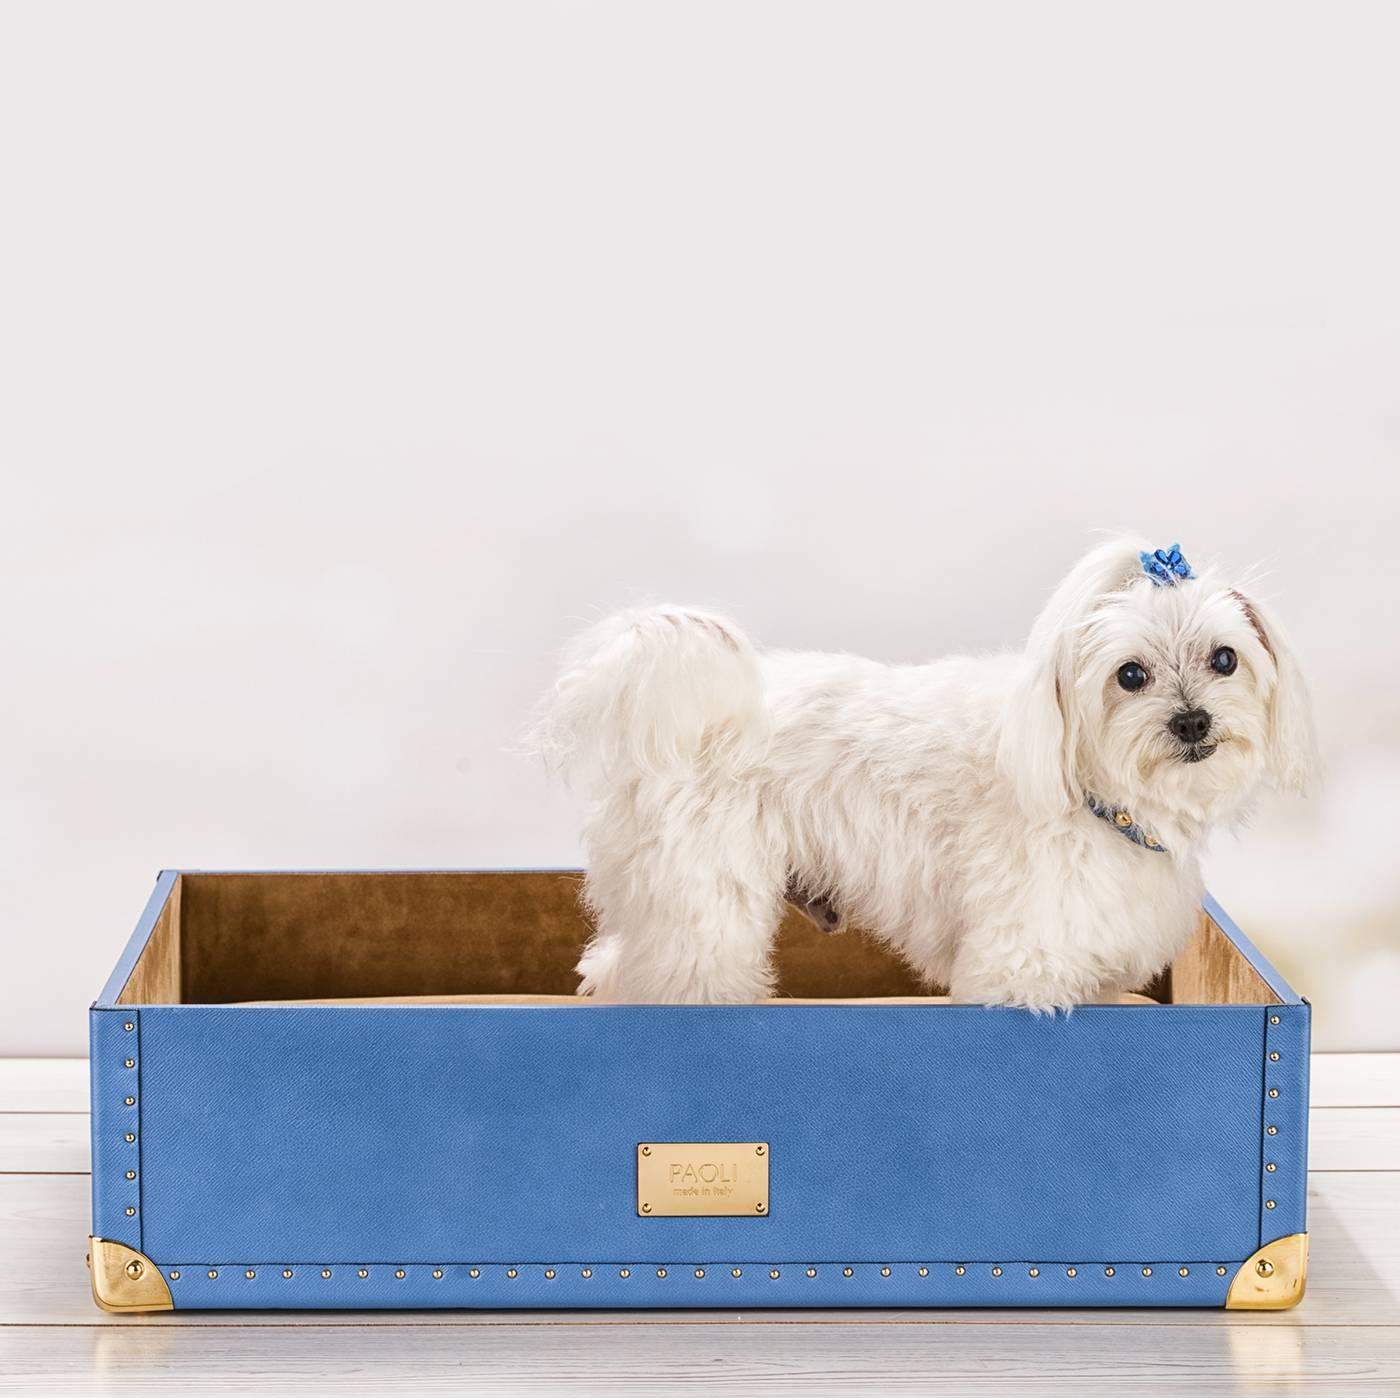 This sophisticated bed for a cat or a dog elevates a simple everyday object to luxurious statement piece and is inspired by the old-fashioned design of traditional traveling trunks. The external cover is in pale blue Saffiano leather with an